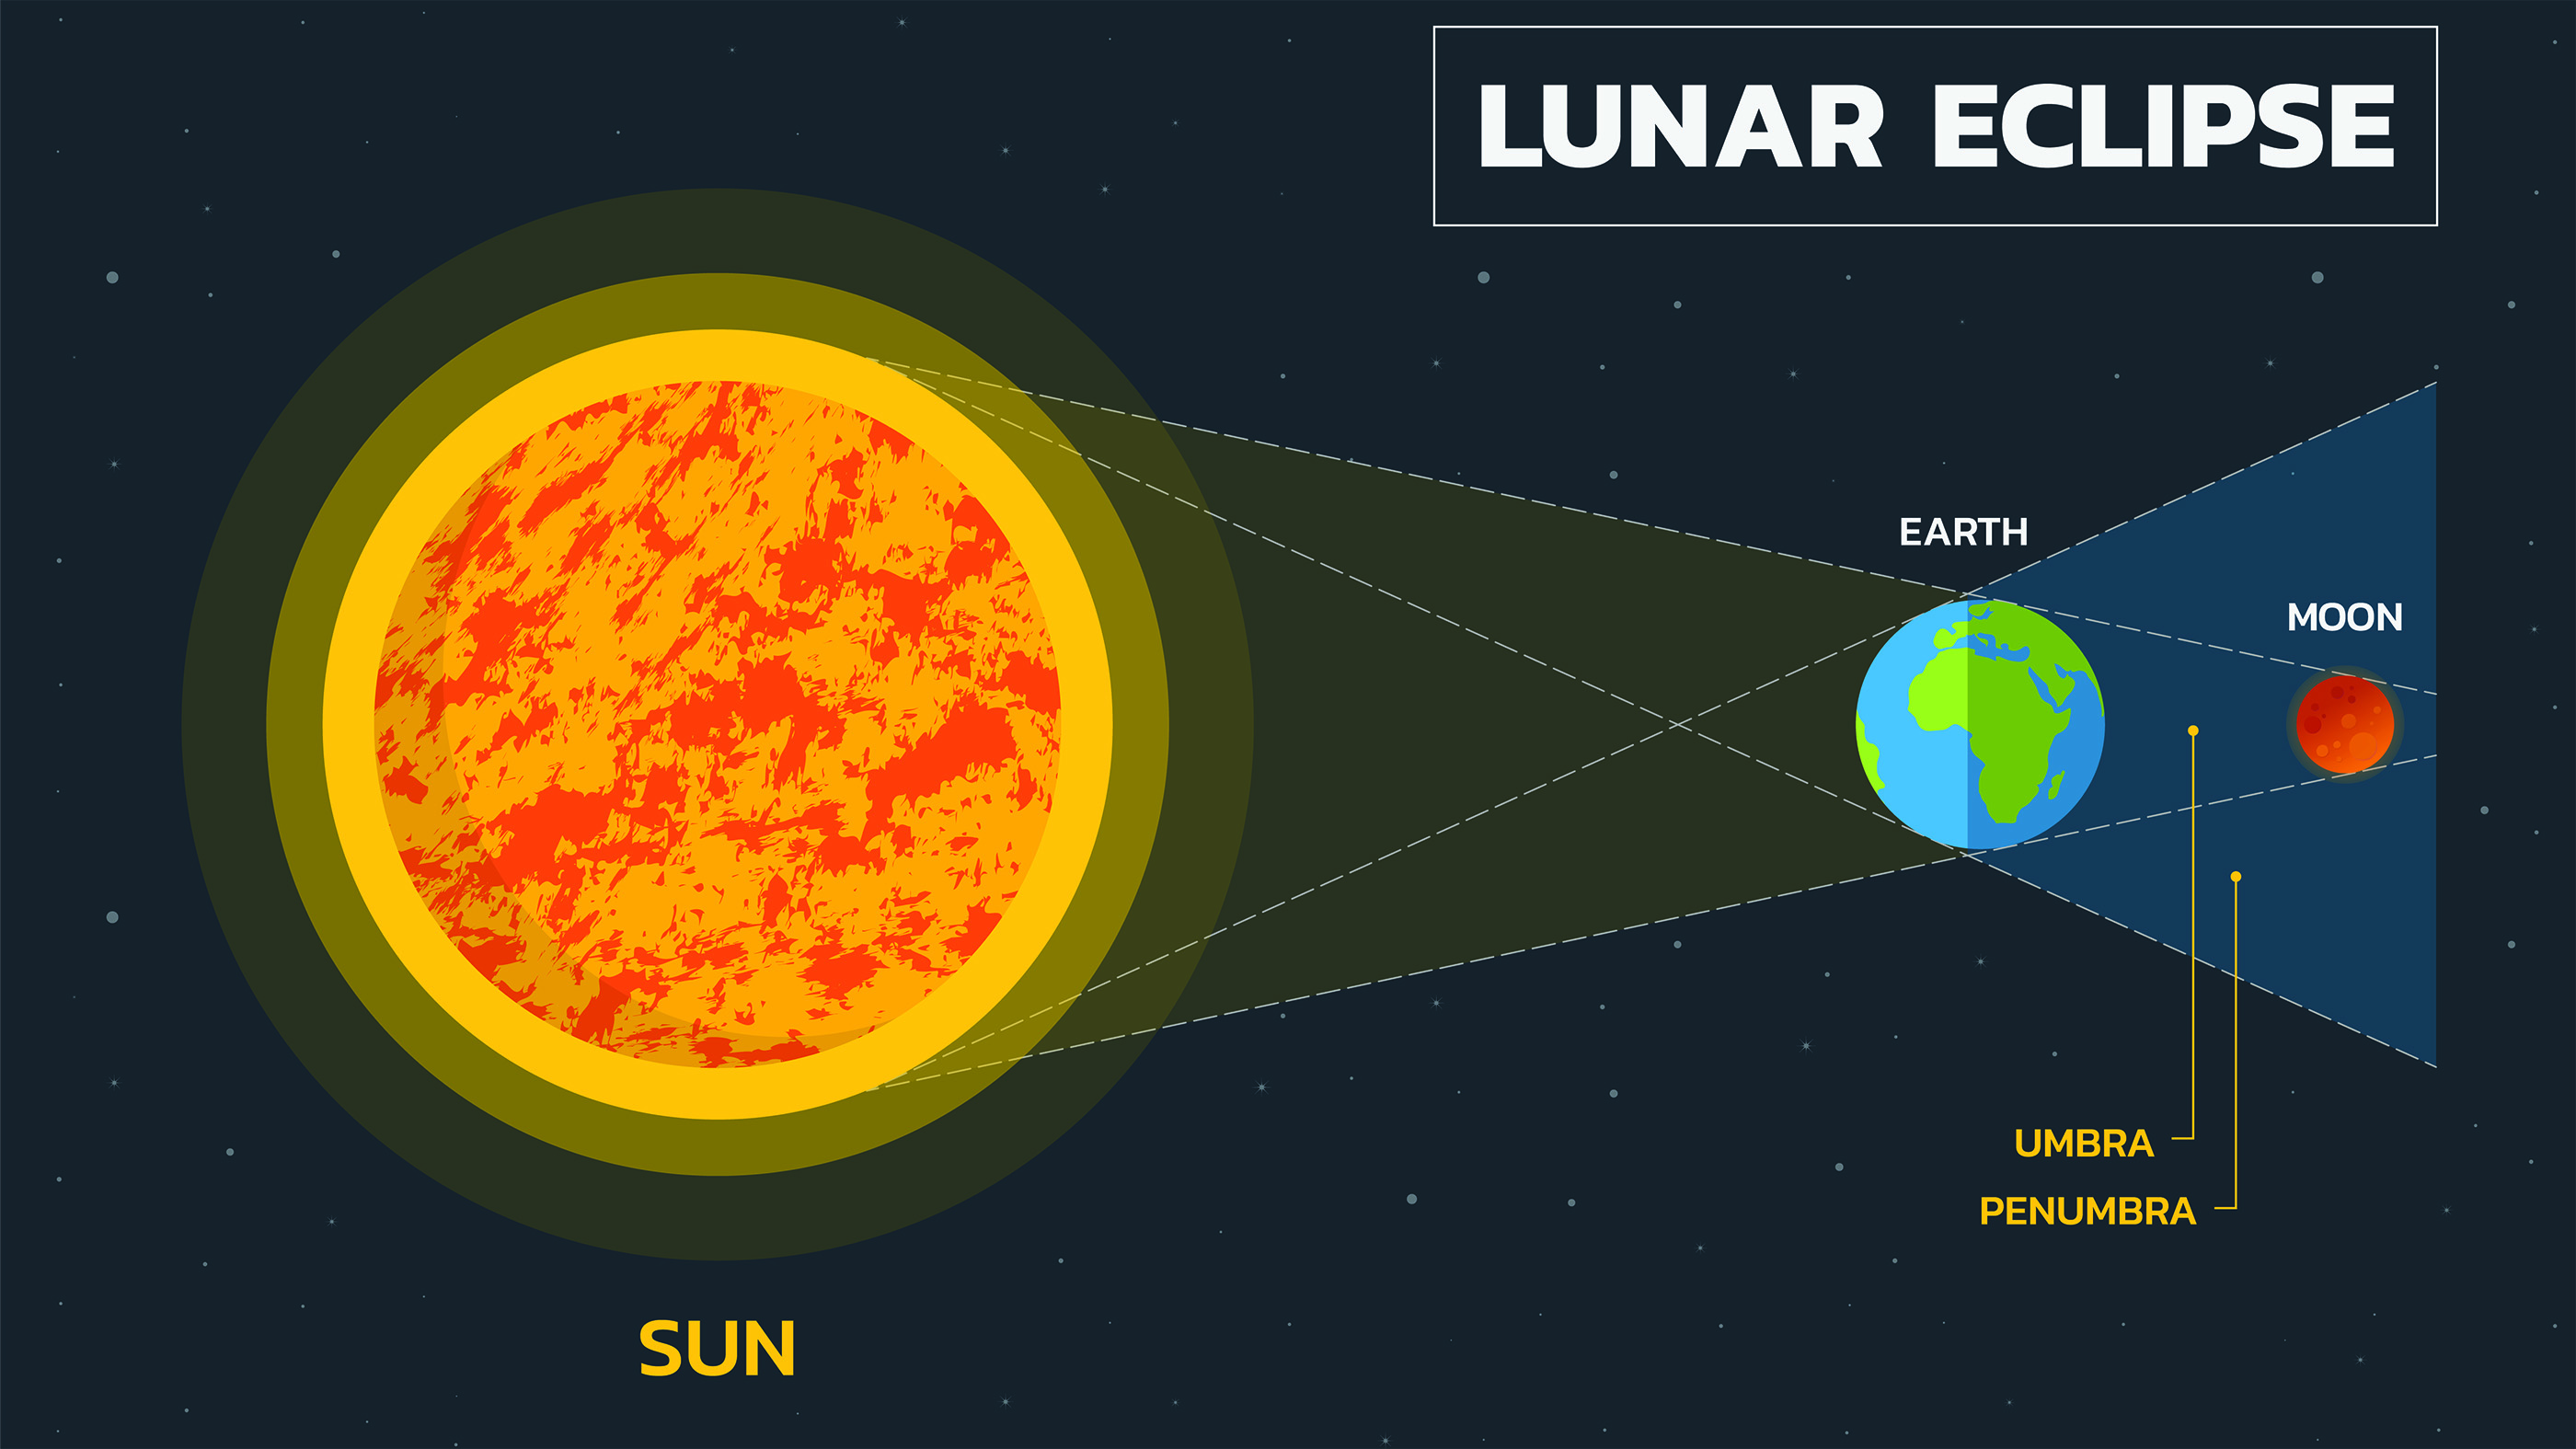 A lunar eclipse occurs when the sun, moon, and earth are aligned in this exact order.